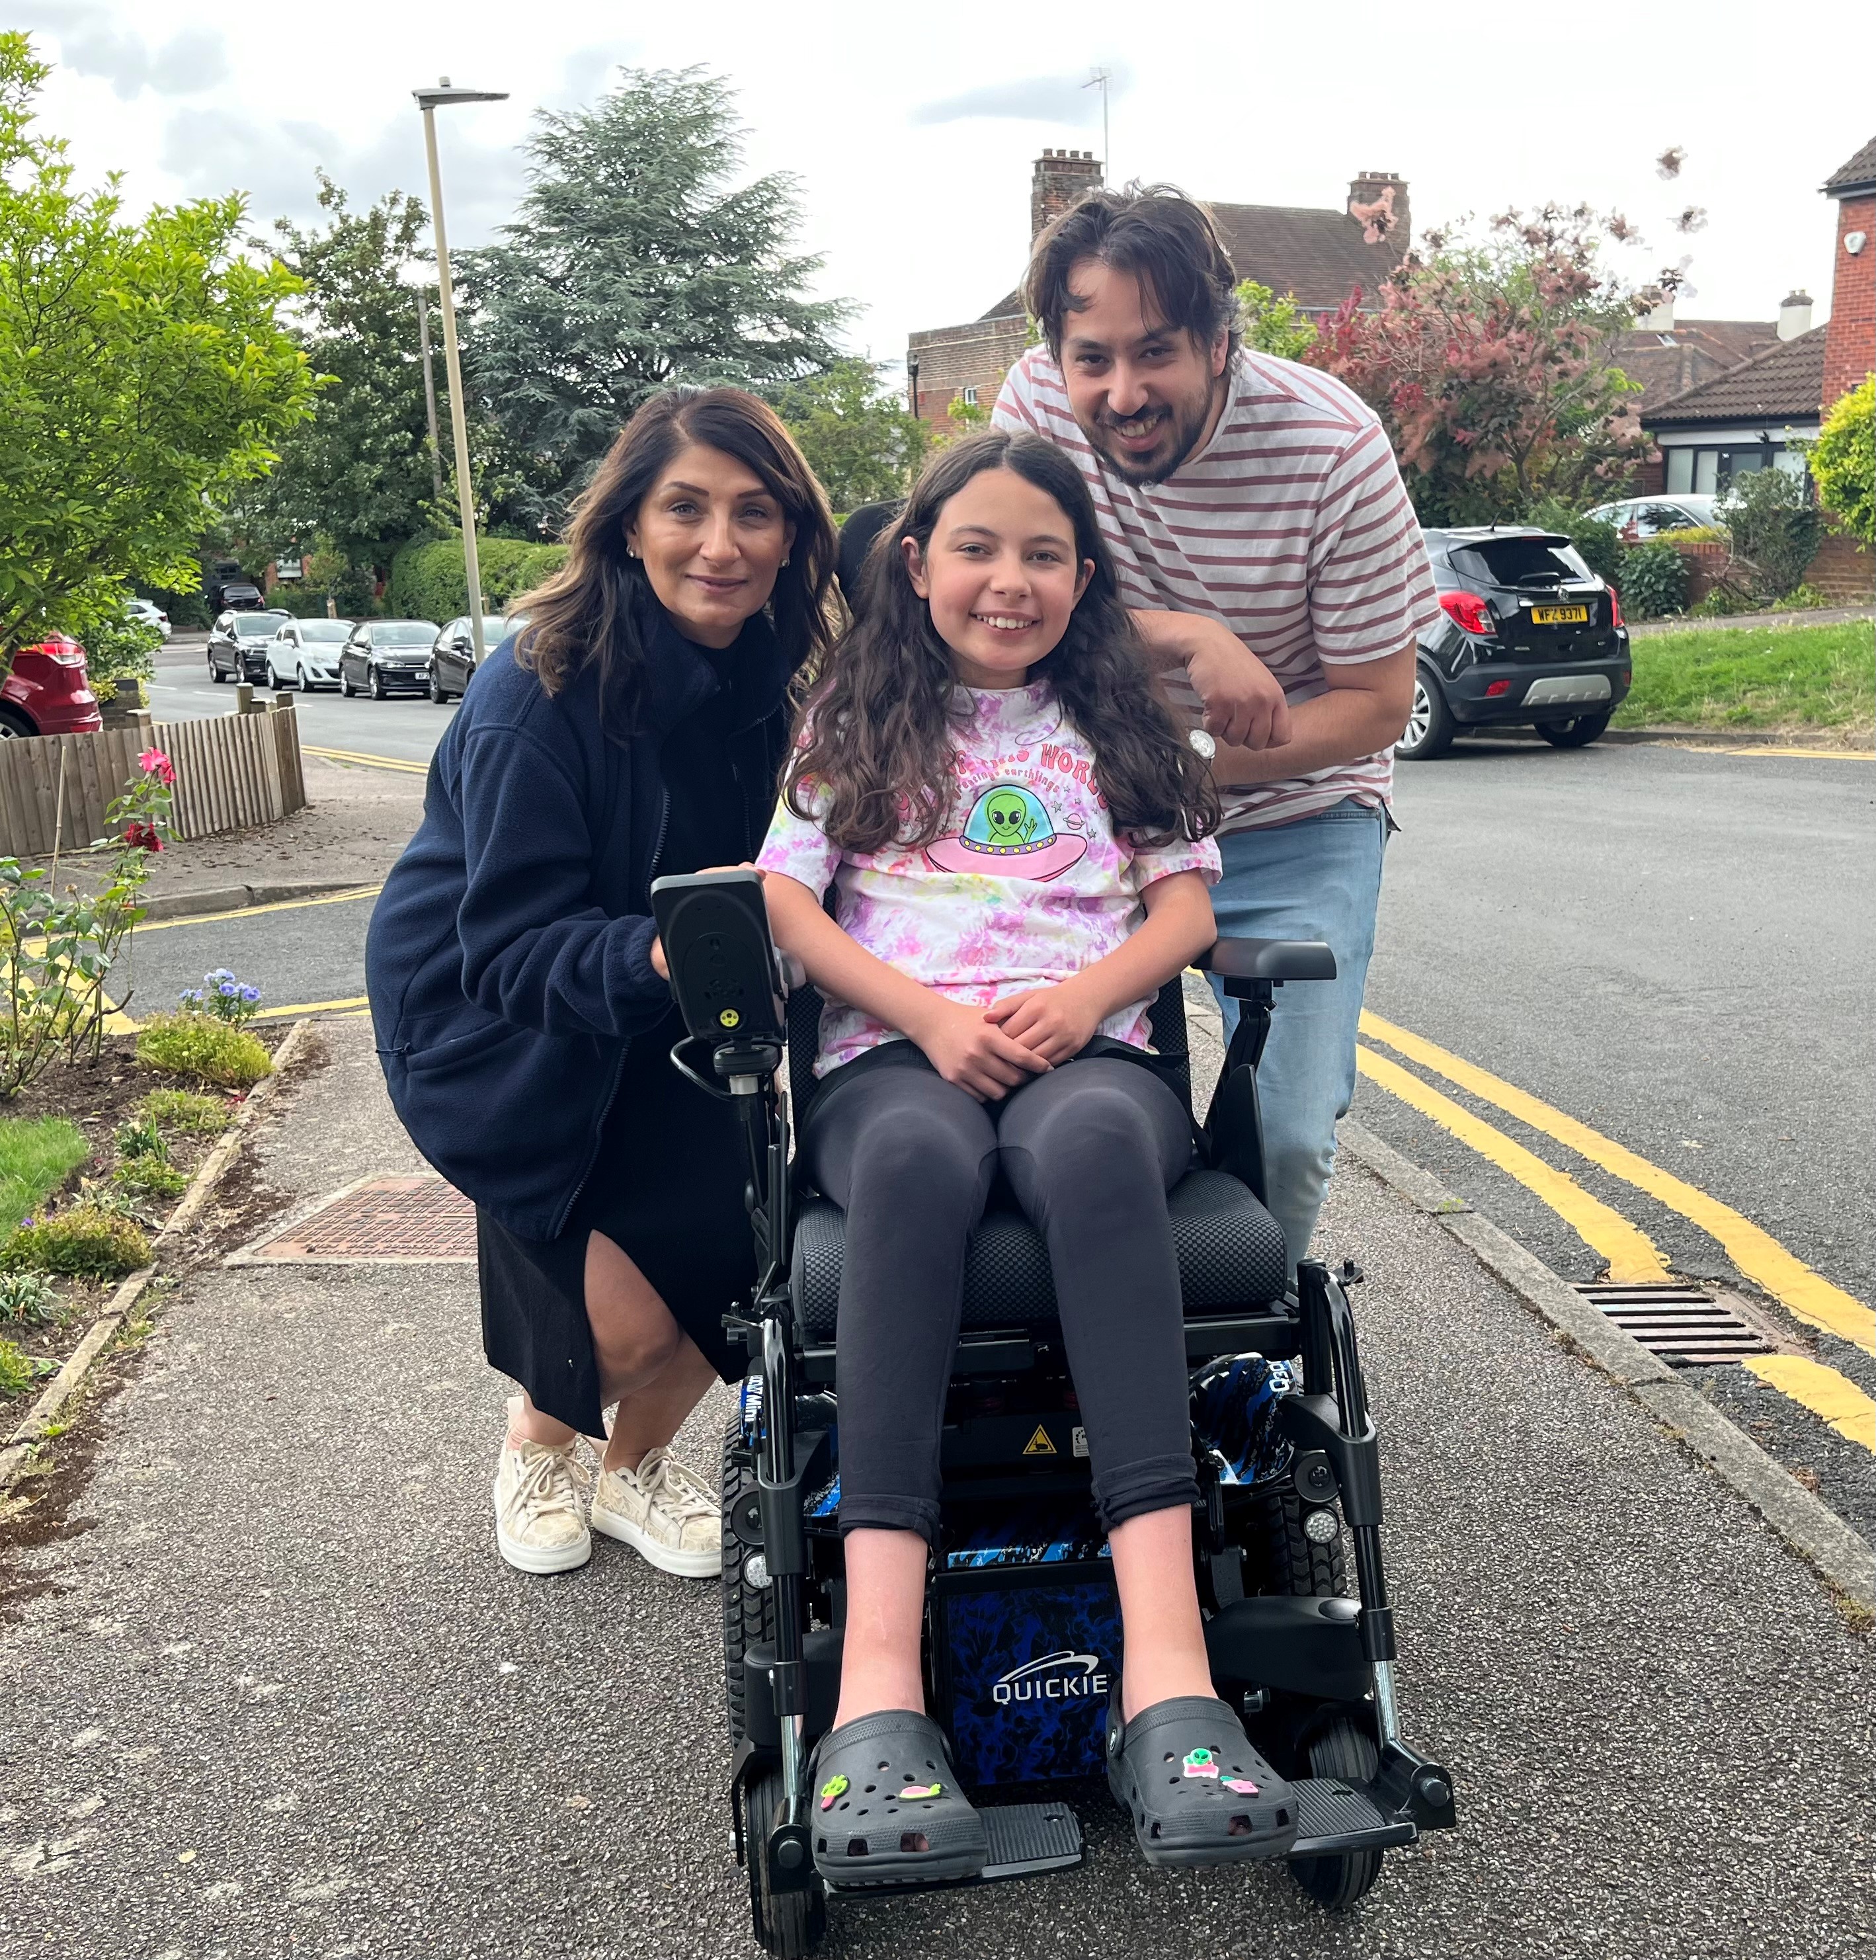 TEENAGE DREAMS COME TRUE FOR DISABLED GIRL Image